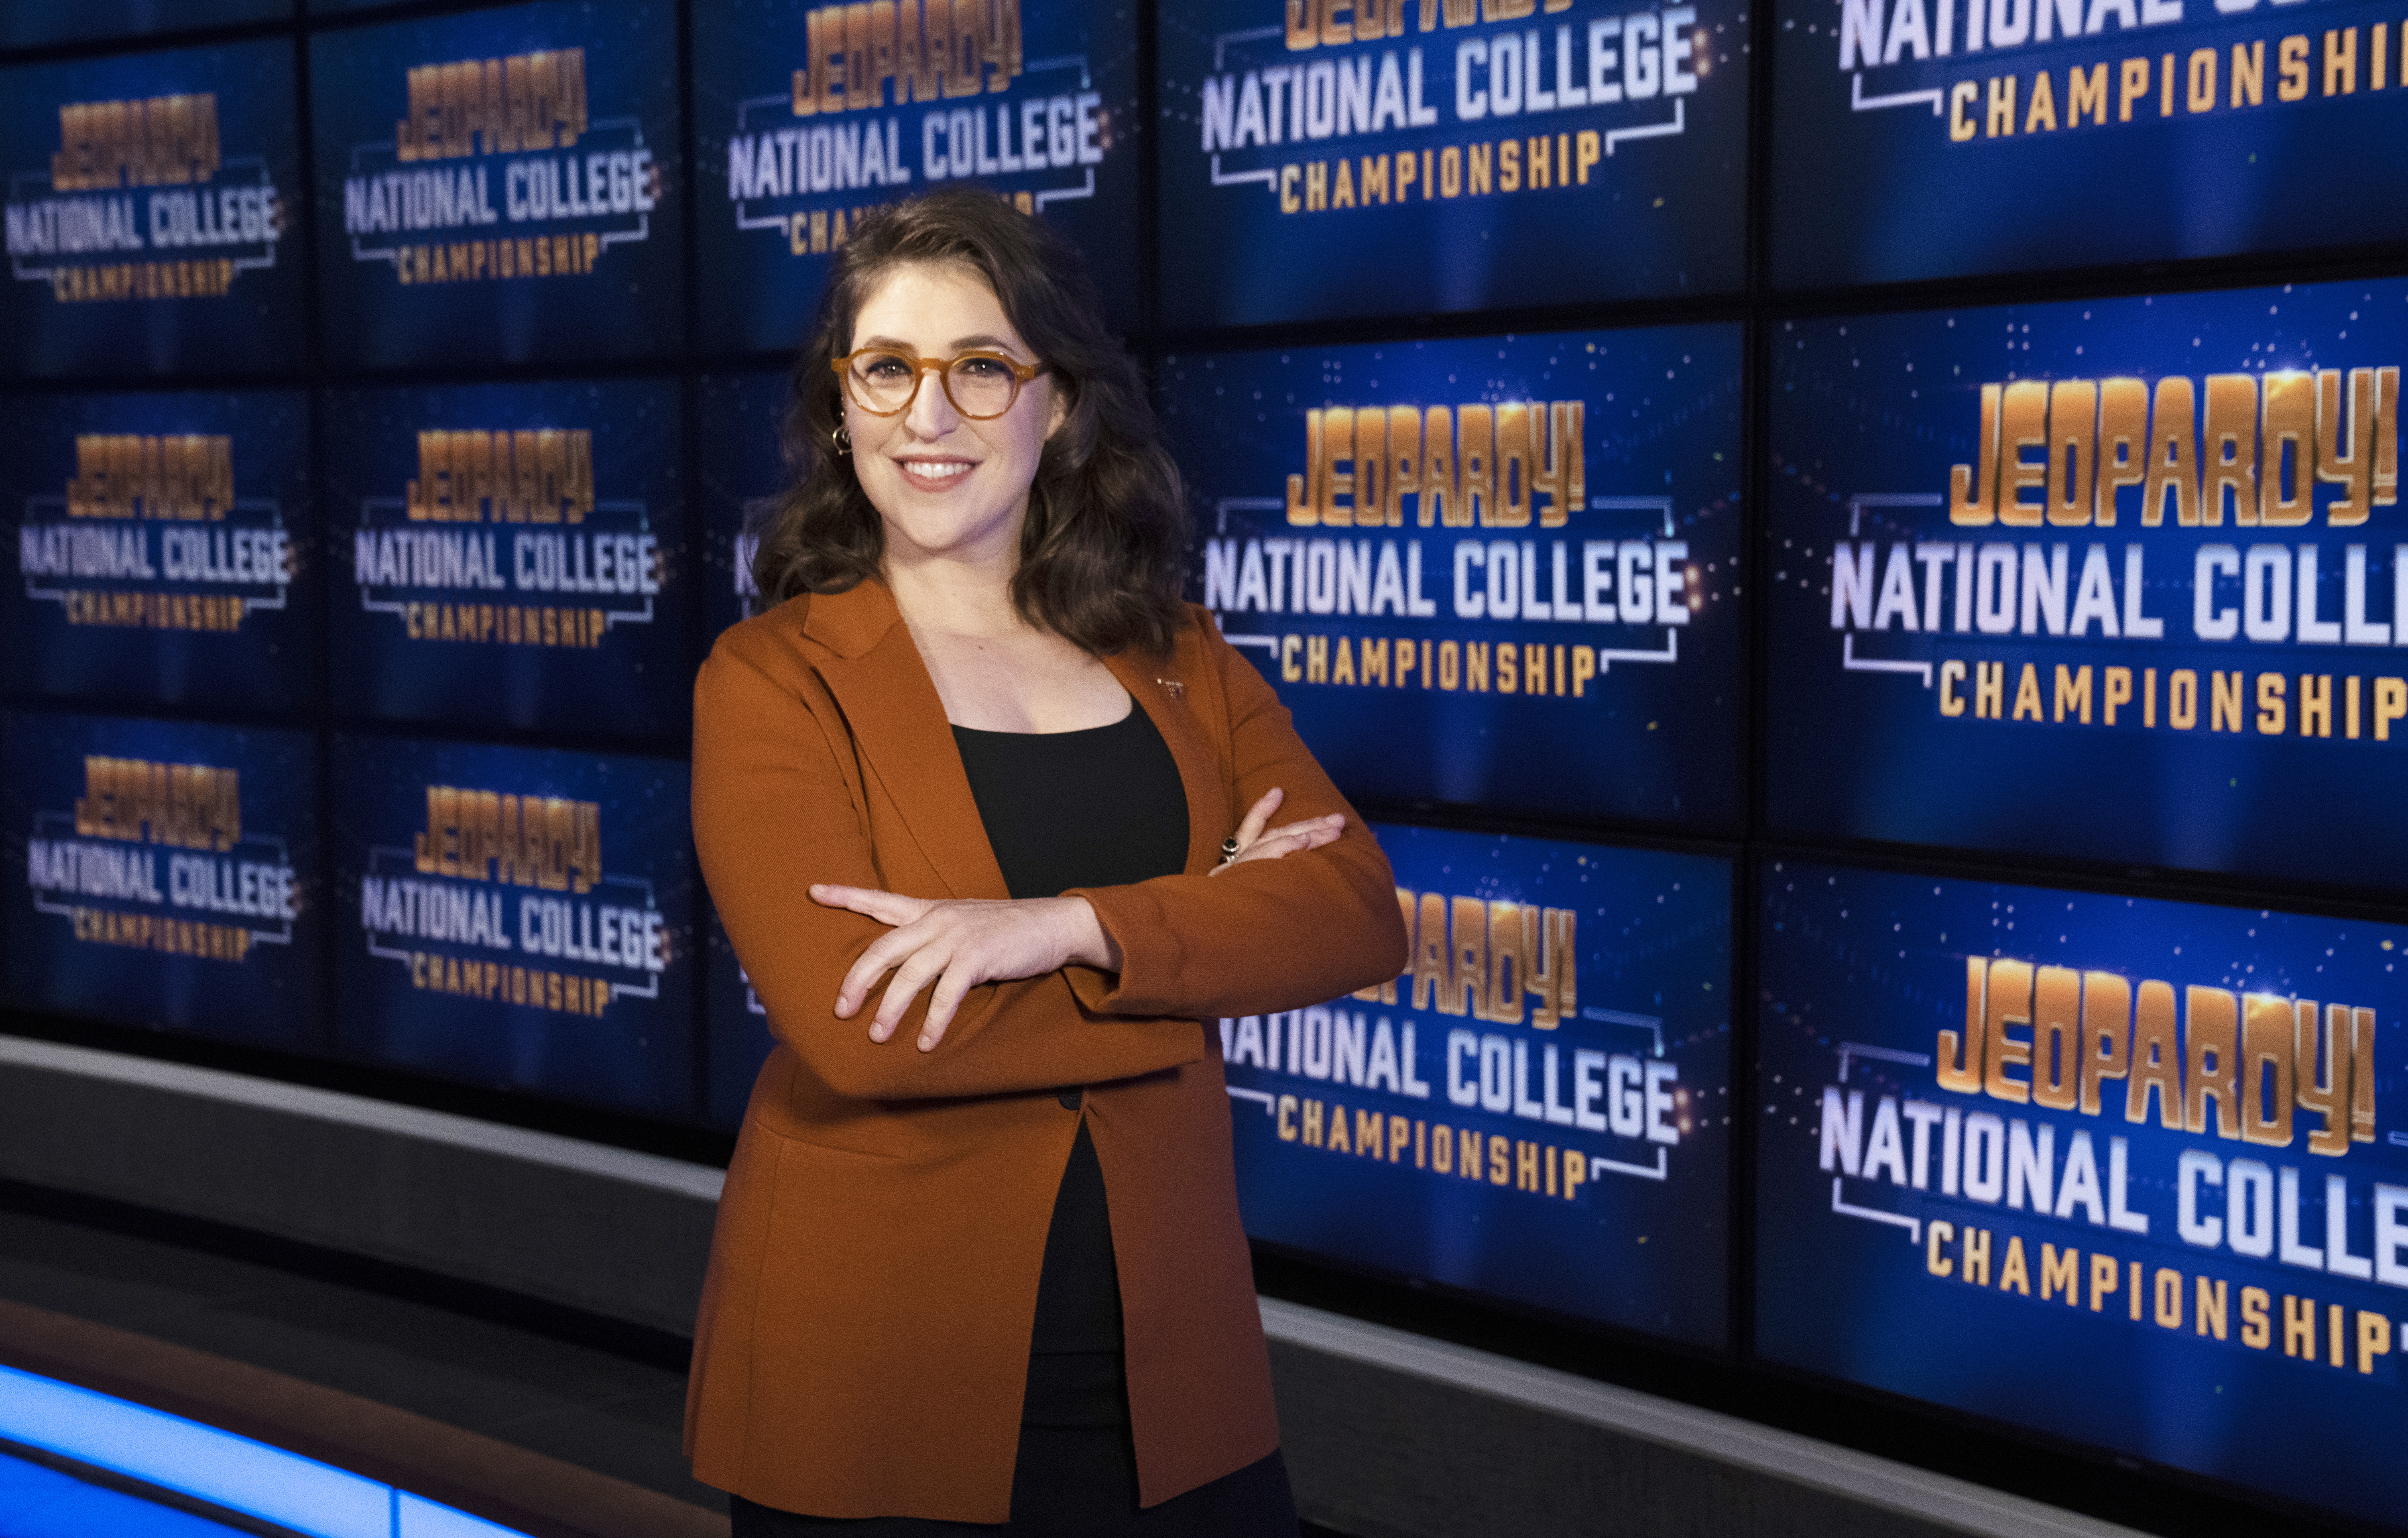 Jeopardy! won an Emmy which Mayim broke her silence to speak on